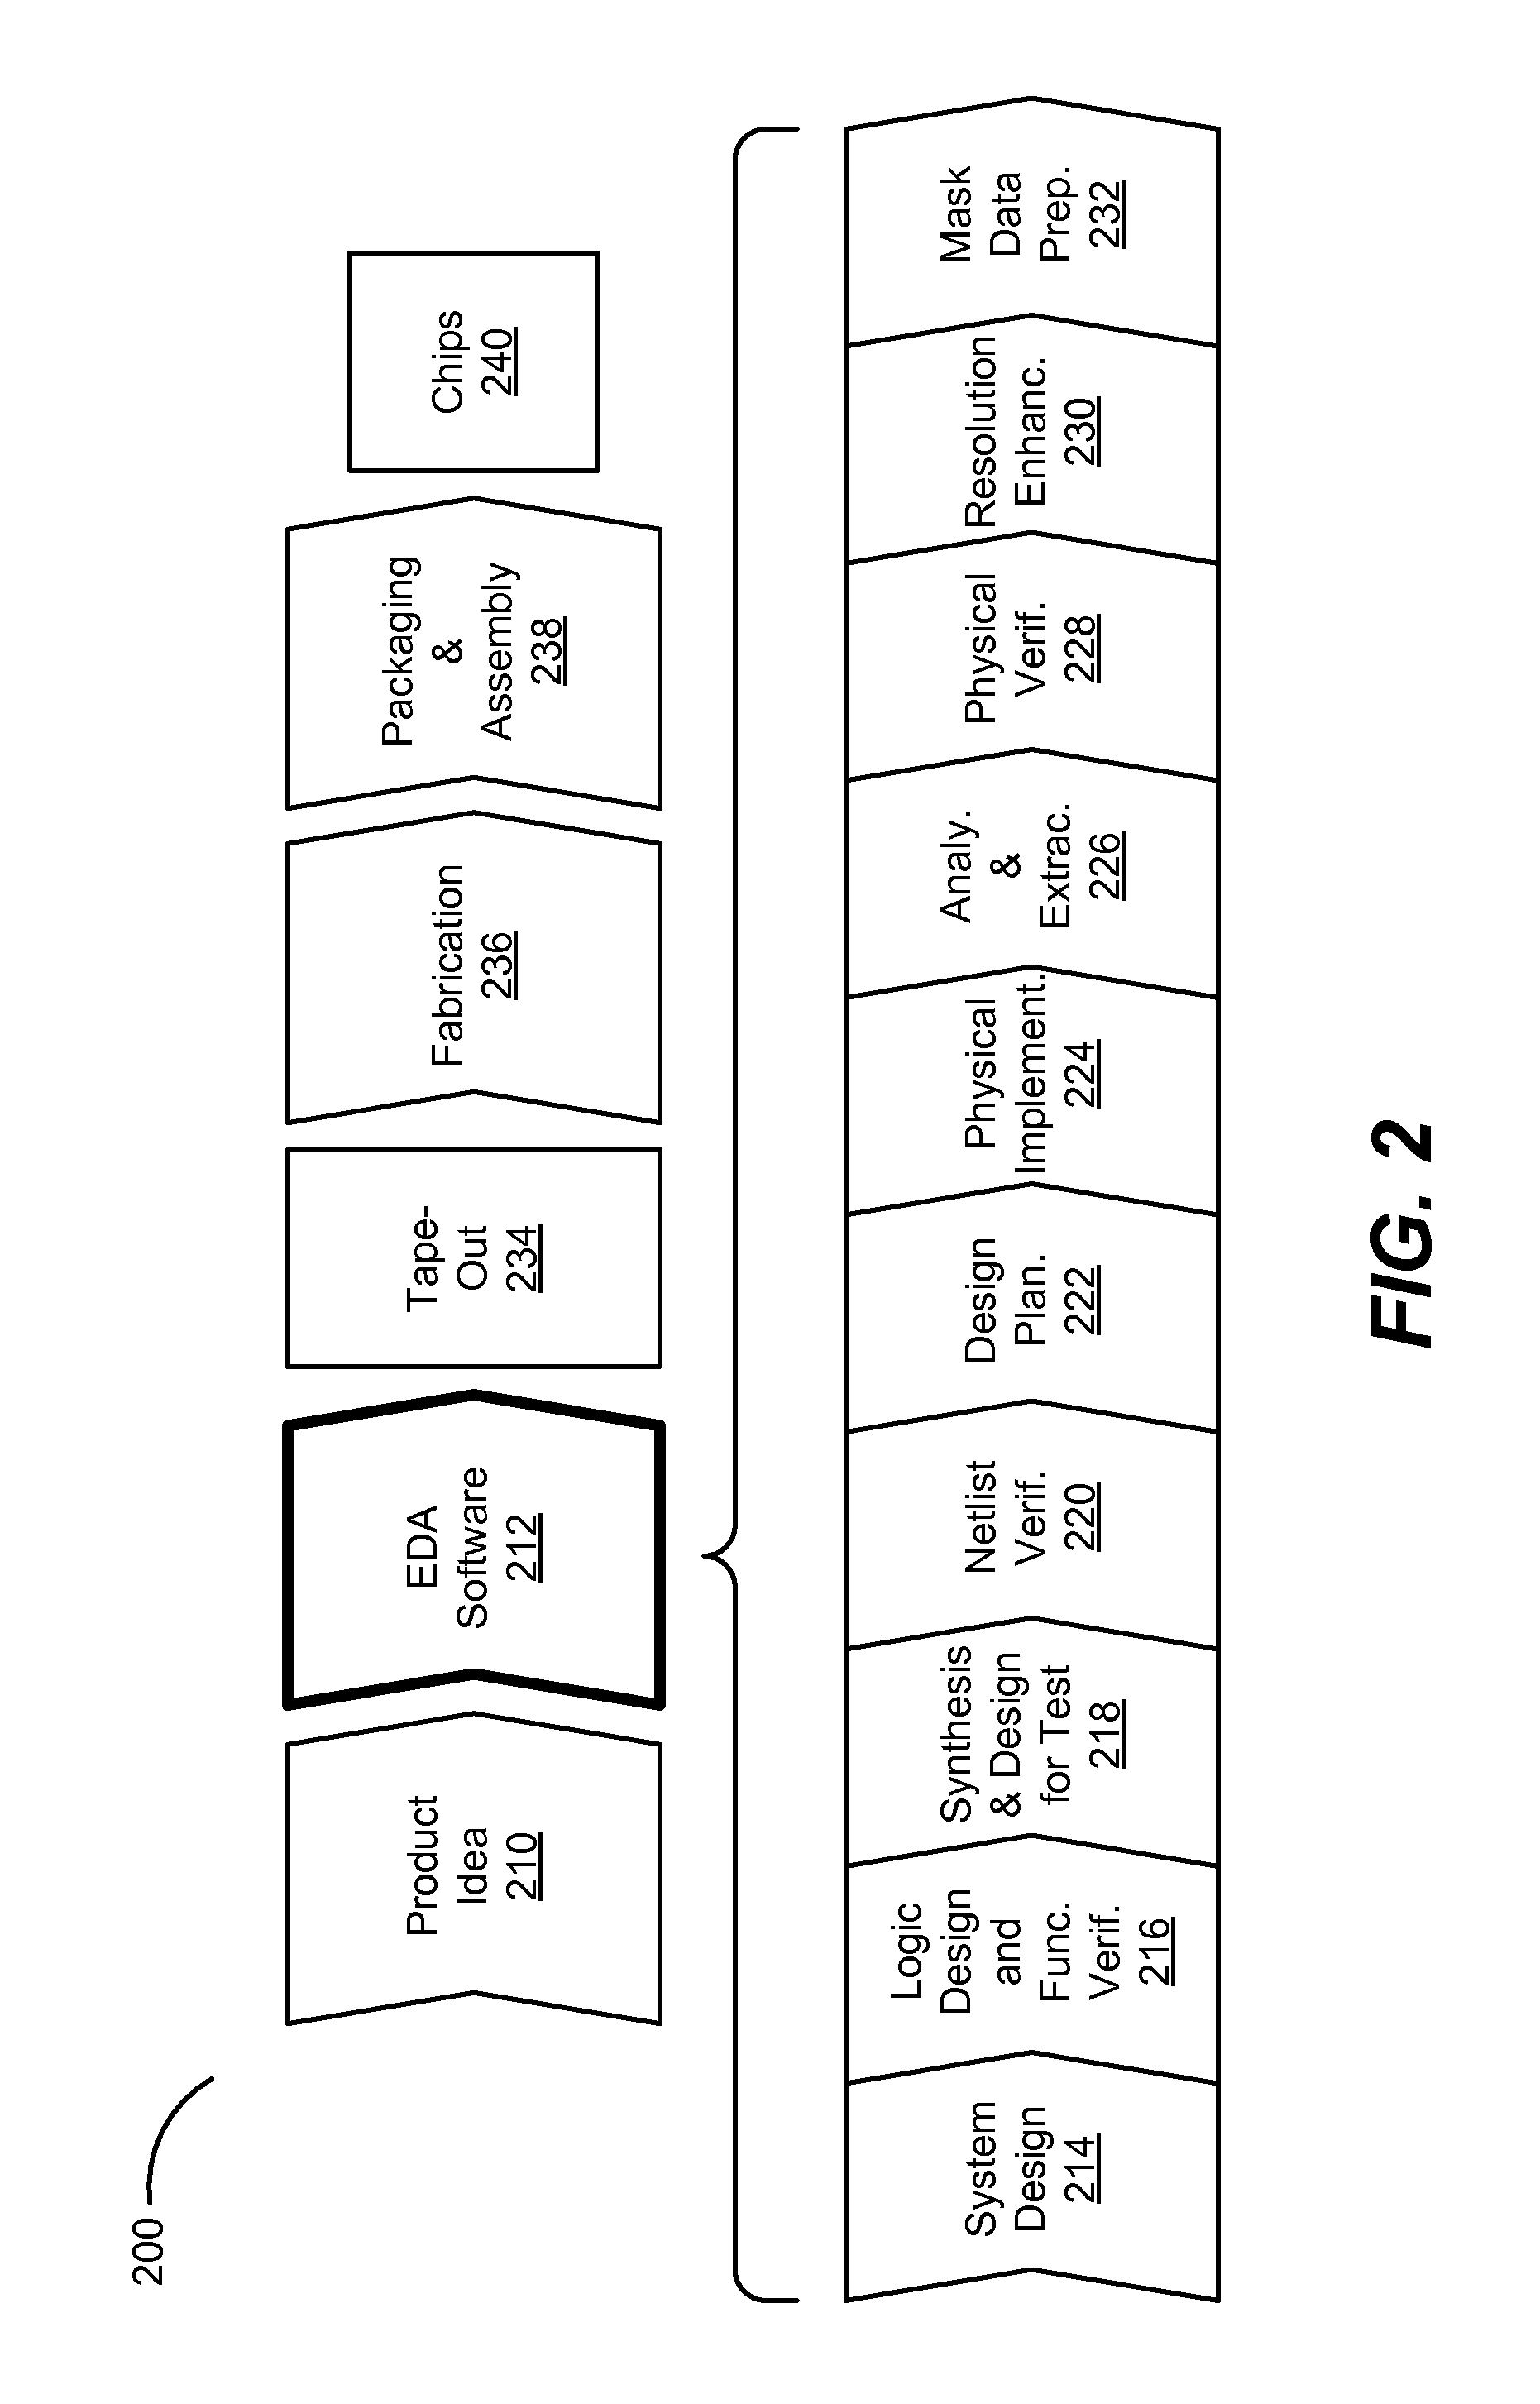 Power routing in standard cell designs